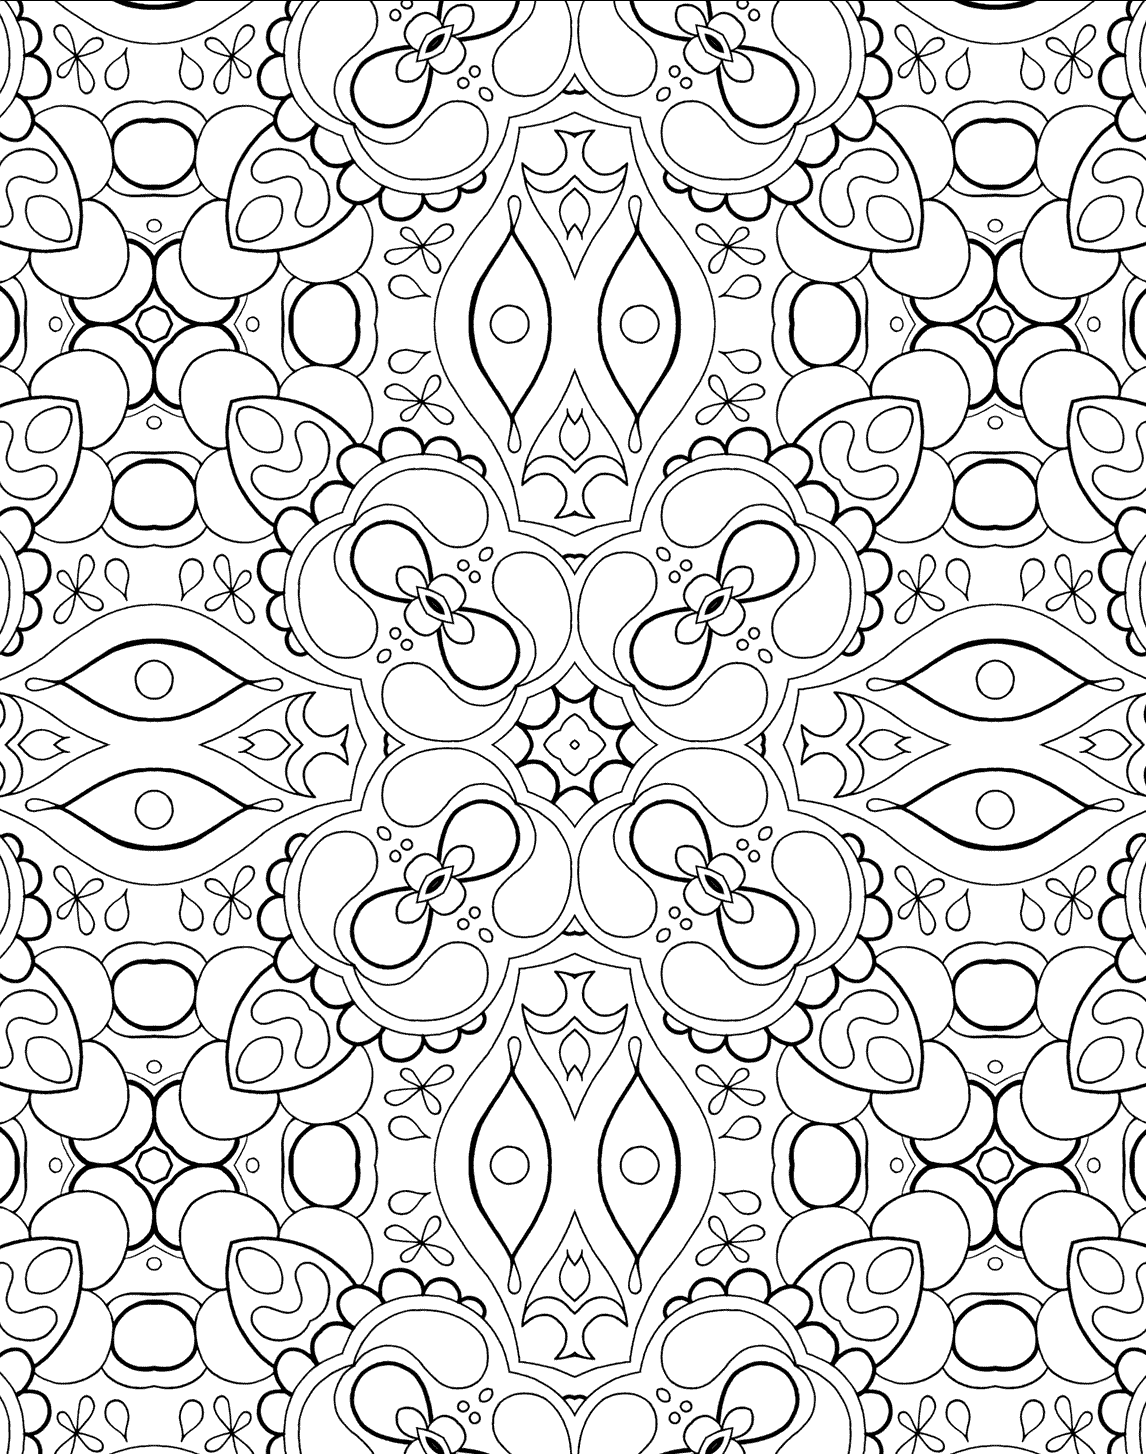 mindfulness-3-coloring-page-free-printable-coloring-pages-for-kids